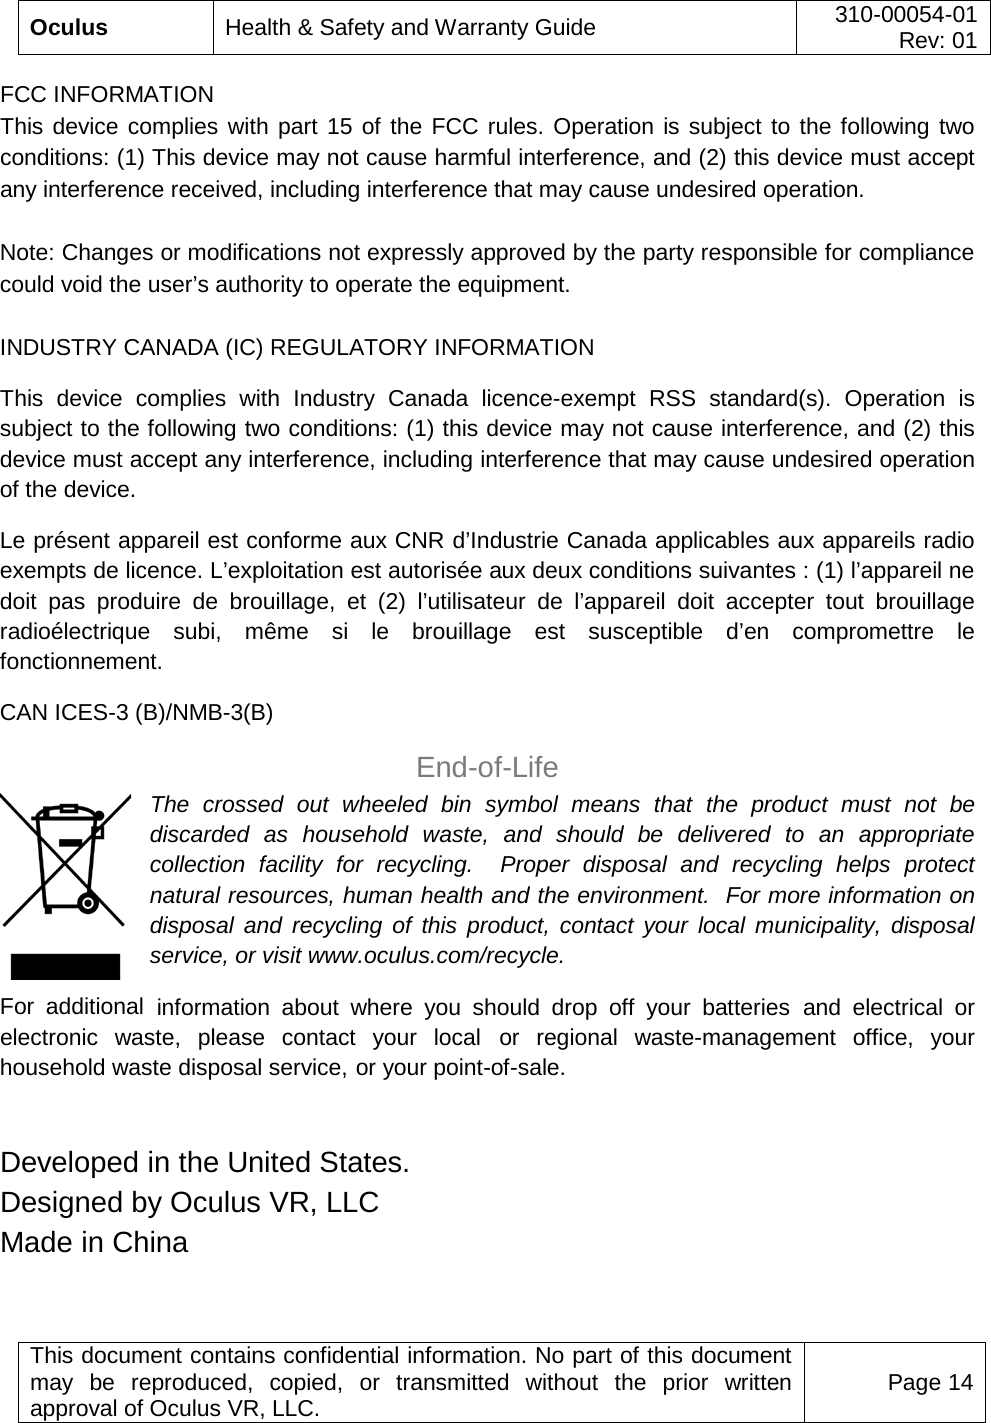  Oculus Health &amp; Safety and Warranty Guide 310-00054-01  Rev: 01   This document contains confidential information. No part of this document may be reproduced, copied, or transmitted without the prior written approval of Oculus VR, LLC. Page 14  FCC INFORMATION  This device complies with part 15 of the FCC rules. Operation is subject to the following two conditions: (1) This device may not cause harmful interference, and (2) this device must accept any interference received, including interference that may cause undesired operation.  Note: Changes or modifications not expressly approved by the party responsible for compliance could void the user’s authority to operate the equipment.   INDUSTRY CANADA (IC) REGULATORY INFORMATION  This device complies with Industry Canada licence-exempt RSS standard(s). Operation is subject to the following two conditions: (1) this device may not cause interference, and (2) this device must accept any interference, including interference that may cause undesired operation of the device.  Le présent appareil est conforme aux CNR d’Industrie Canada applicables aux appareils radio exempts de licence. L’exploitation est autorisée aux deux conditions suivantes : (1) l’appareil ne doit pas produire de brouillage, et (2) l’utilisateur de l’appareil doit accepter tout brouillage radioélectrique subi, même si le brouillage est susceptible d’en compromettre le fonctionnement.  CAN ICES-3 (B)/NMB-3(B) End-of-Life The crossed out wheeled bin symbol means that  the product must not be discarded as household waste, and should be delivered to an appropriate collection facility for recycling.  Proper disposal and recycling helps protect natural resources, human health and the environment.  For more information on disposal and recycling of this product, contact your local municipality, disposal service, or visit www.oculus.com/recycle. For  additional information about where you should drop off your batteries and electrical or electronic waste, please contact your local or regional waste-management  office, your household waste disposal service, or your point-of-sale.  Developed in the United States. Designed by Oculus VR, LLC   Made in China 